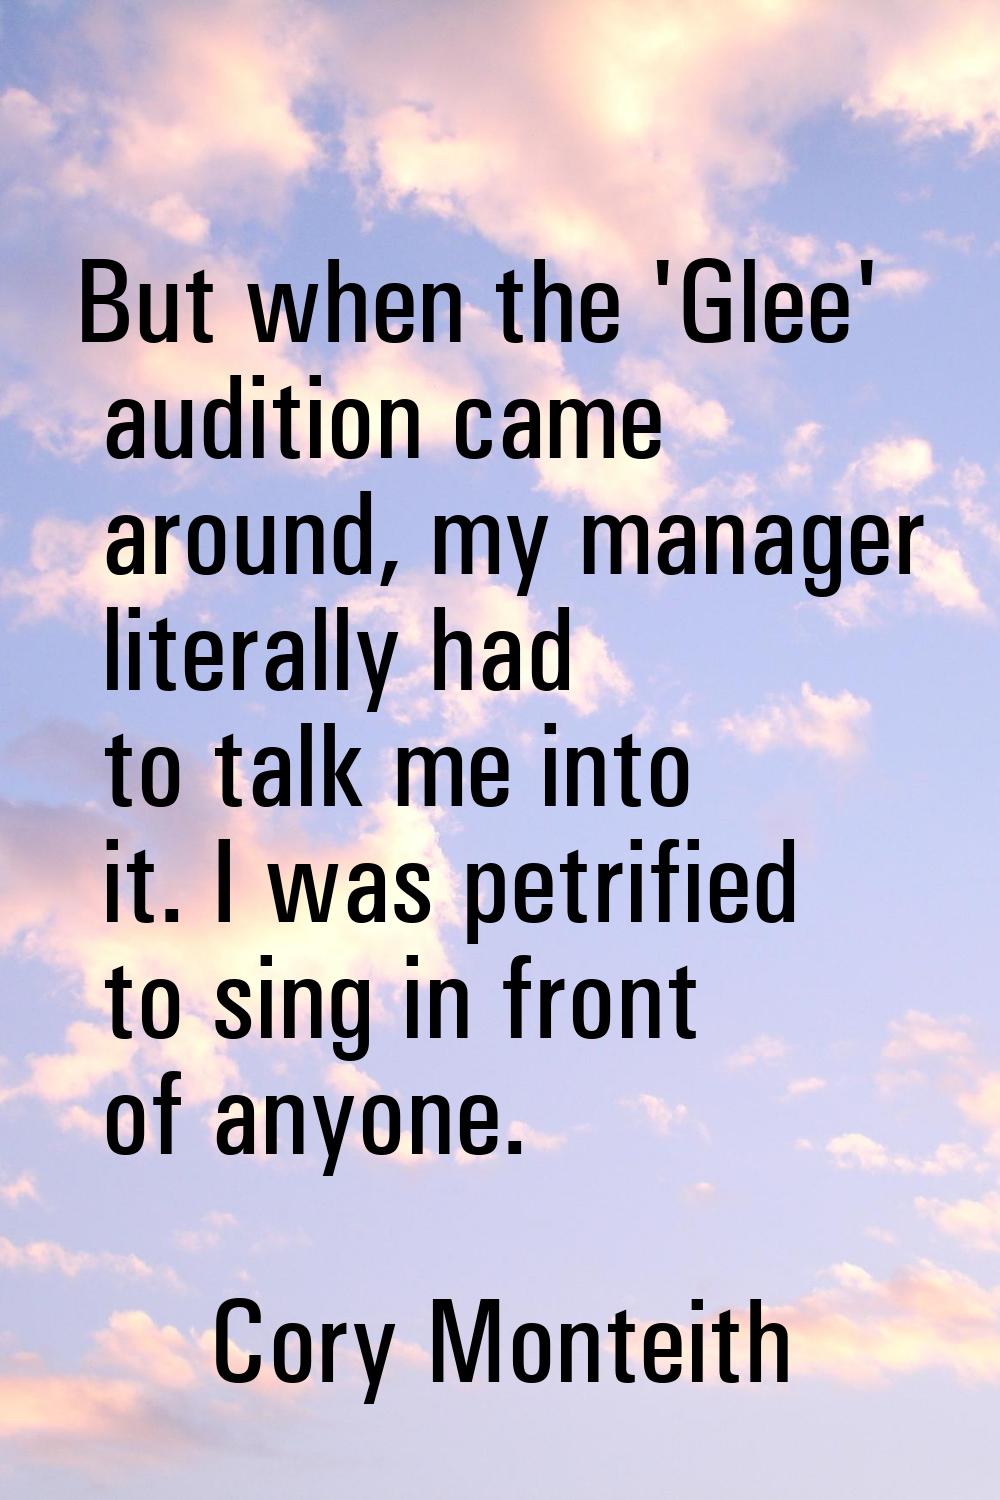 But when the 'Glee' audition came around, my manager literally had to talk me into it. I was petrif